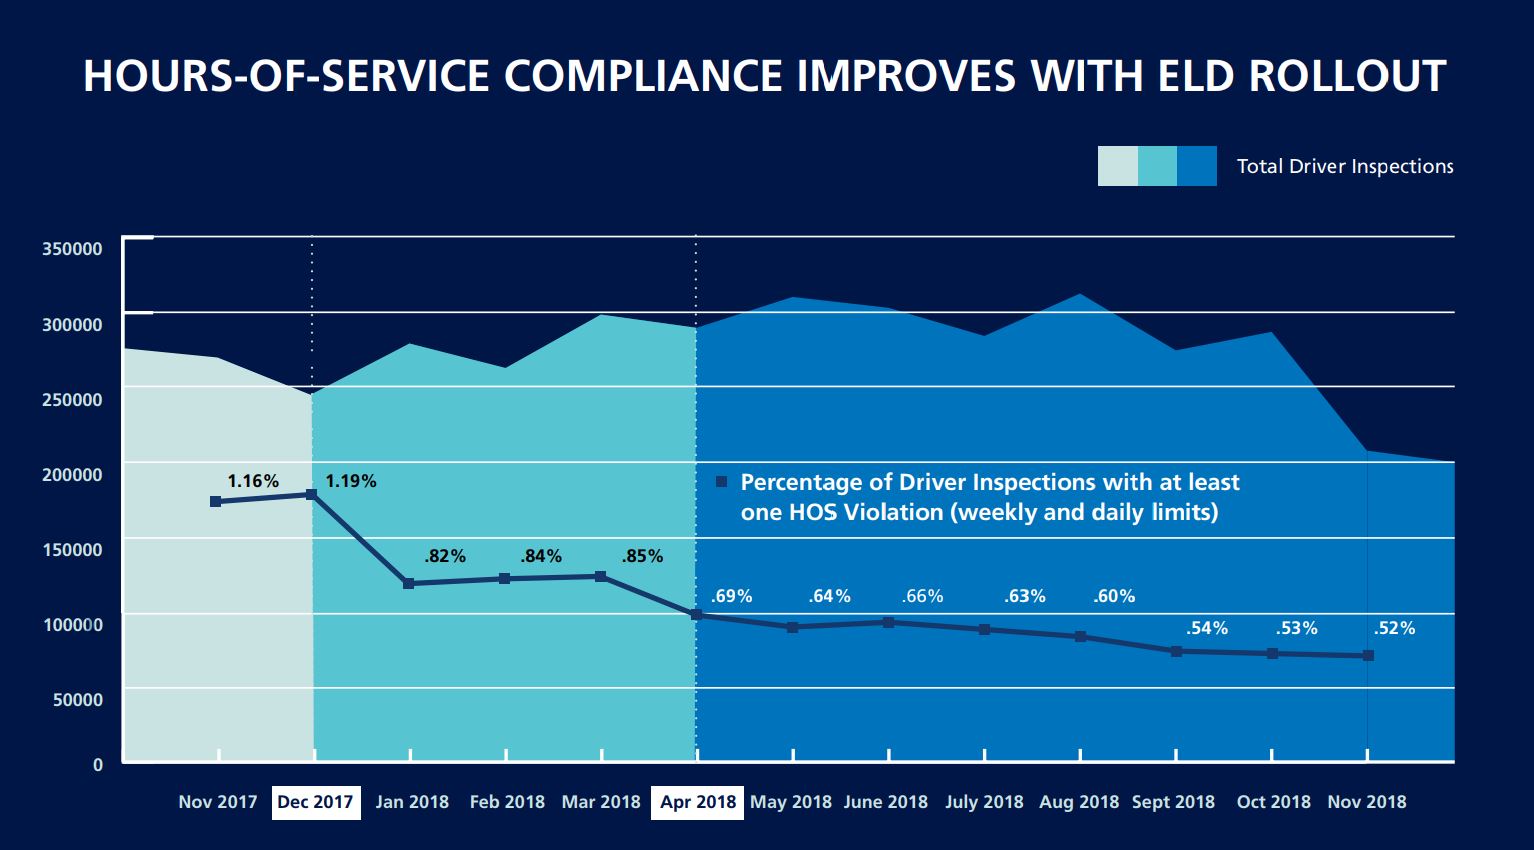 FMCSA stats around ELD and driver safety